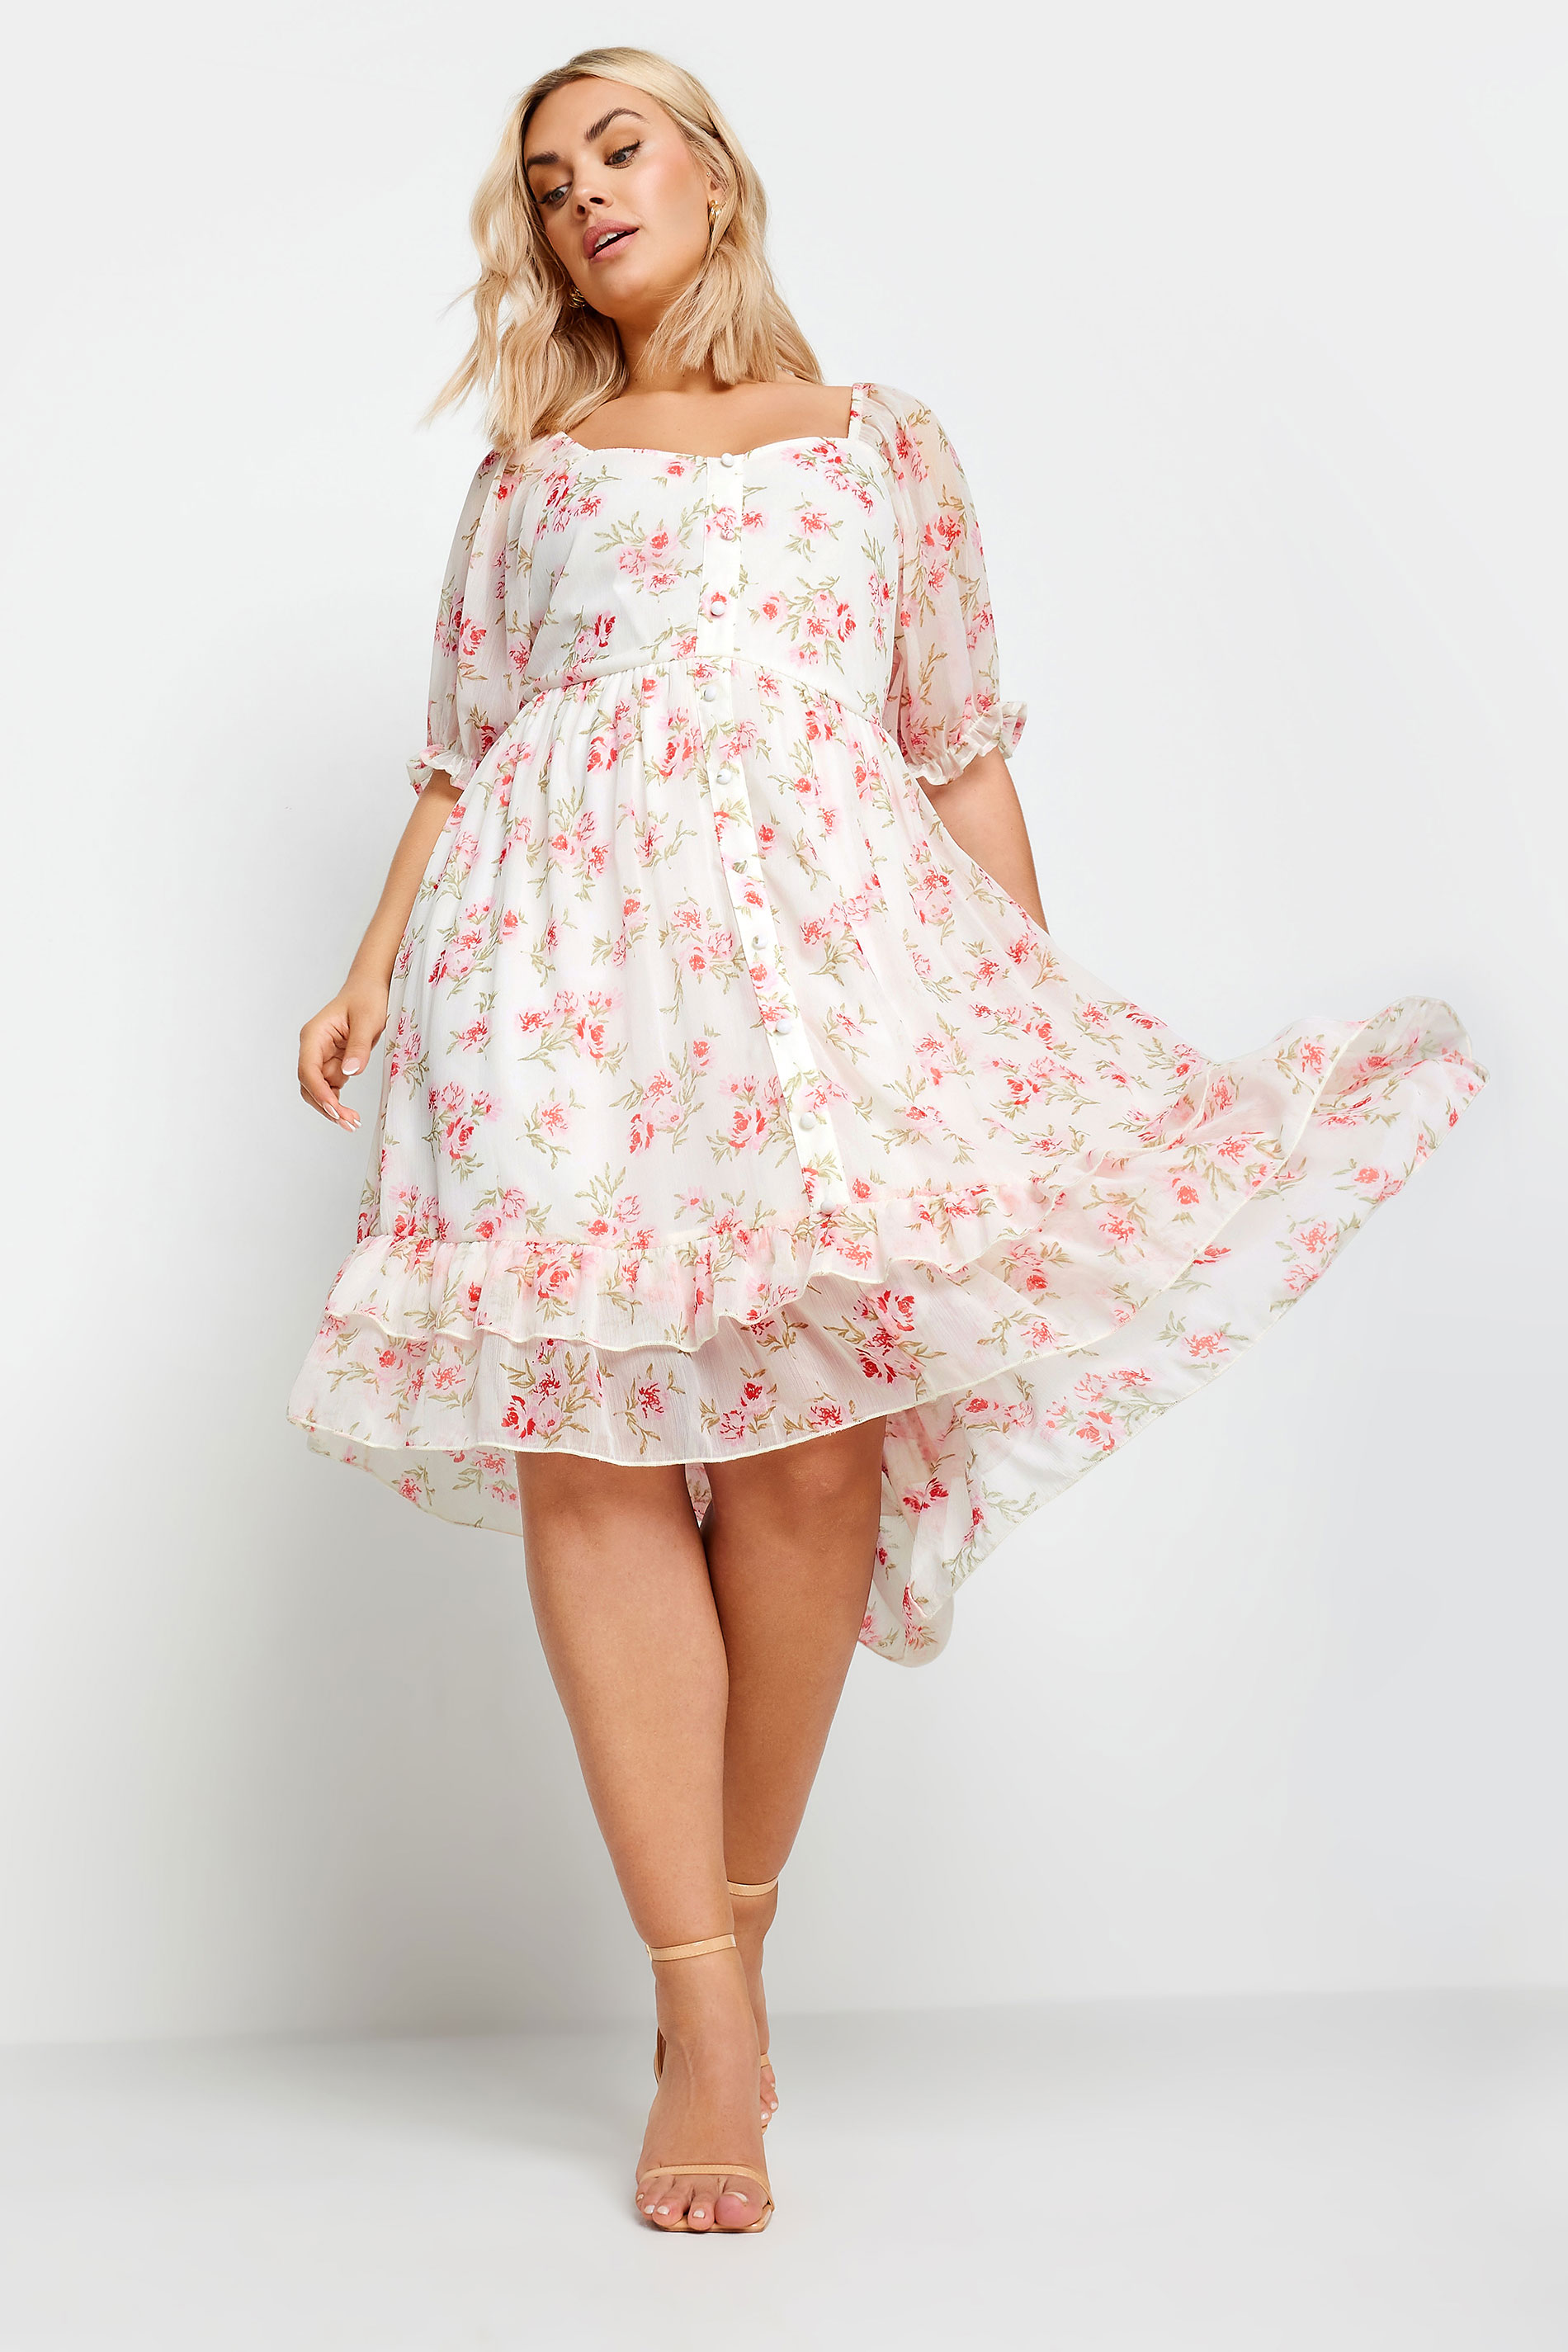 LIMITED COLLECTION Plus Size White Floral Print Dipped Hem Midi Dress | Yours Clothing 2